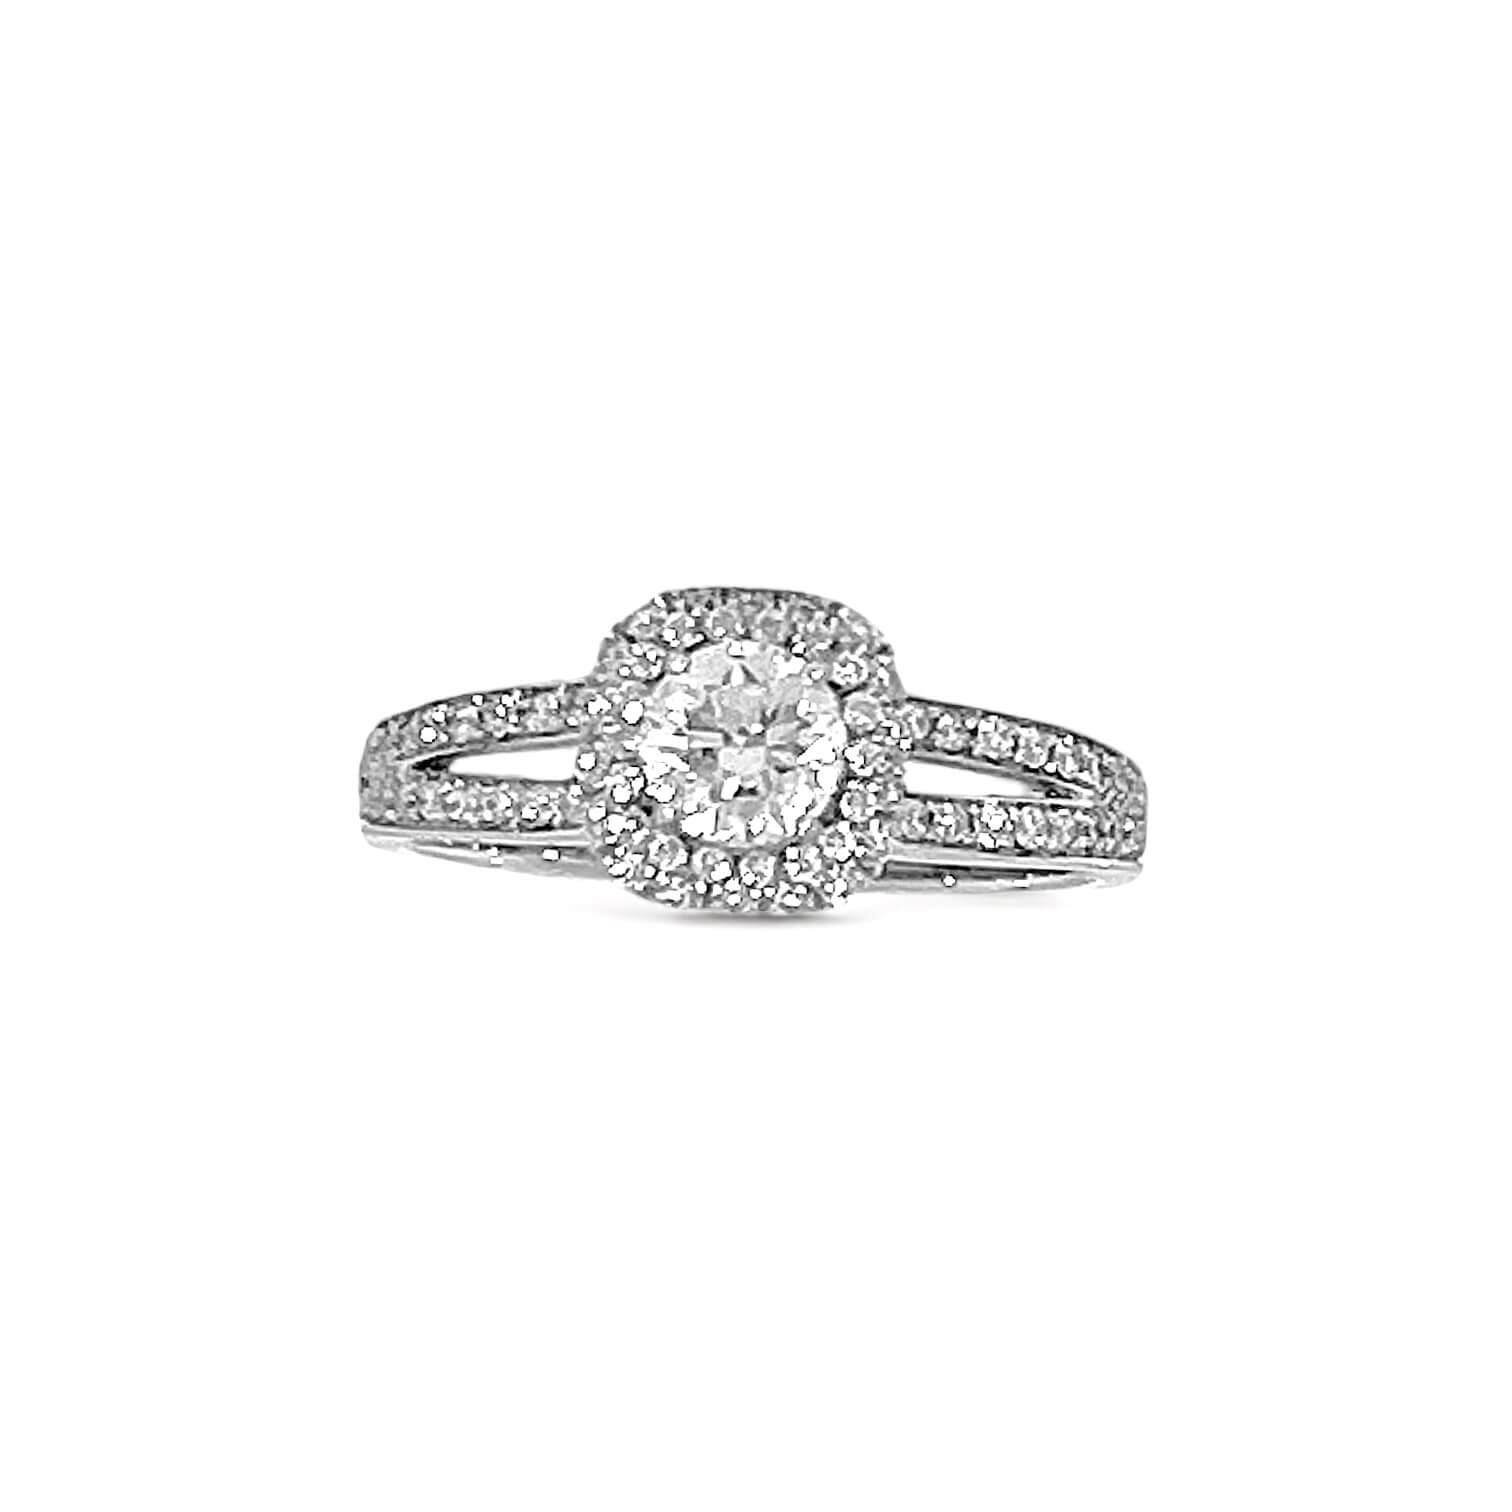 Solitaire diamond ring certified GIA America pursuant to Article 544/A